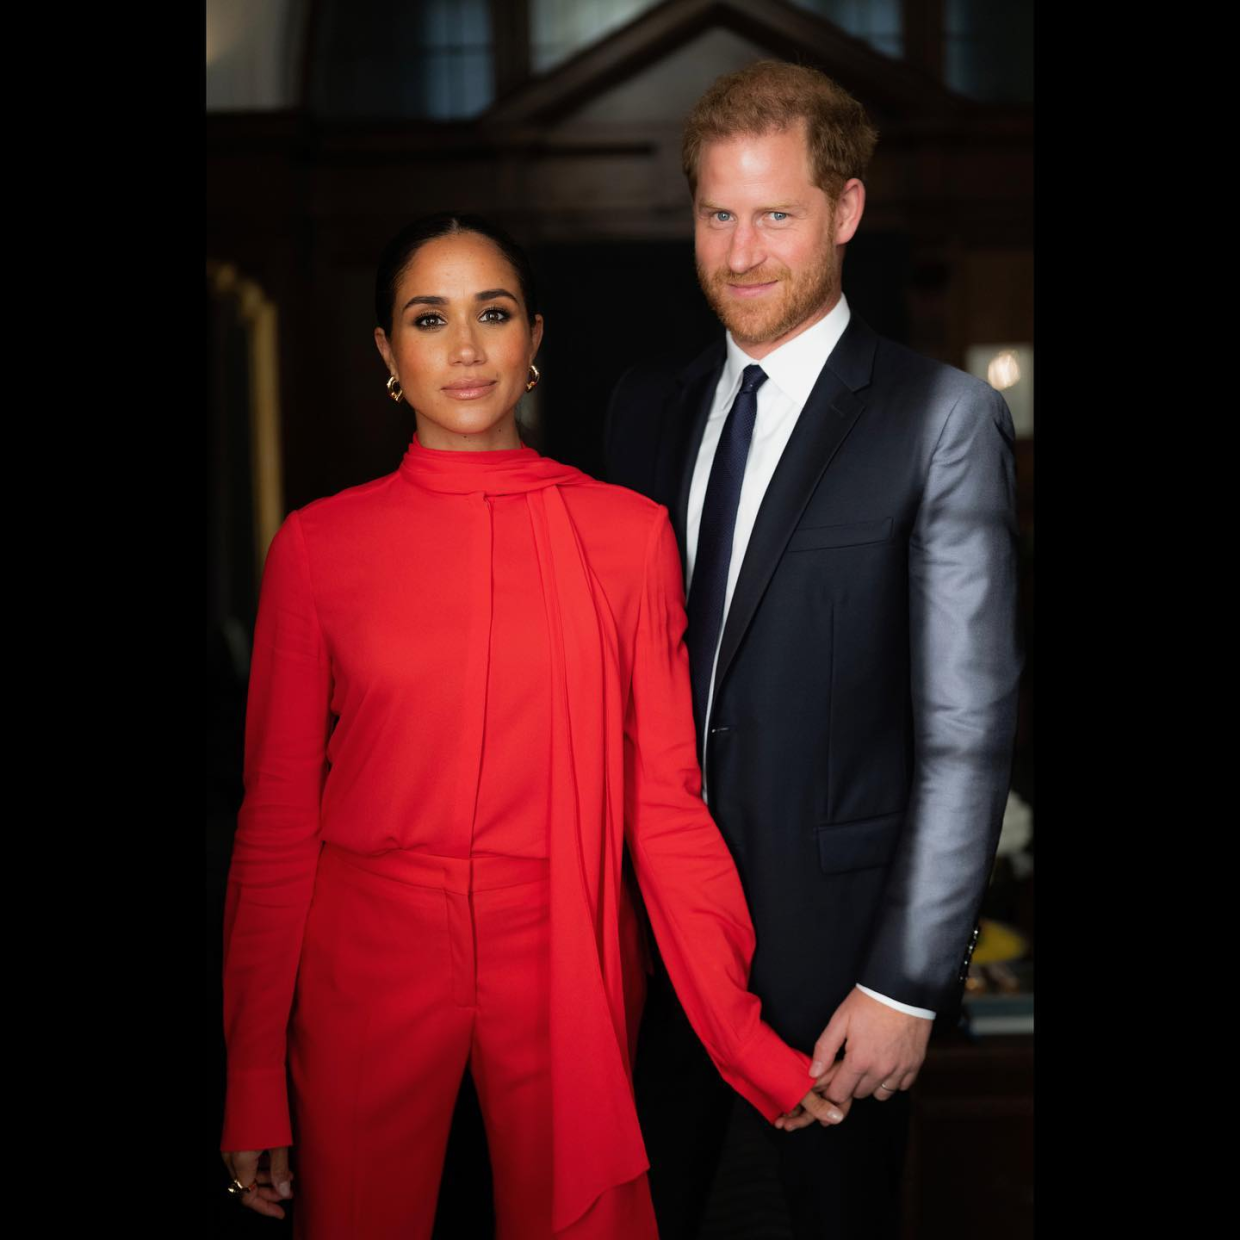 Prince Harry and Meghan Markle spotted dancing during date night at acoustic star’s gig in California